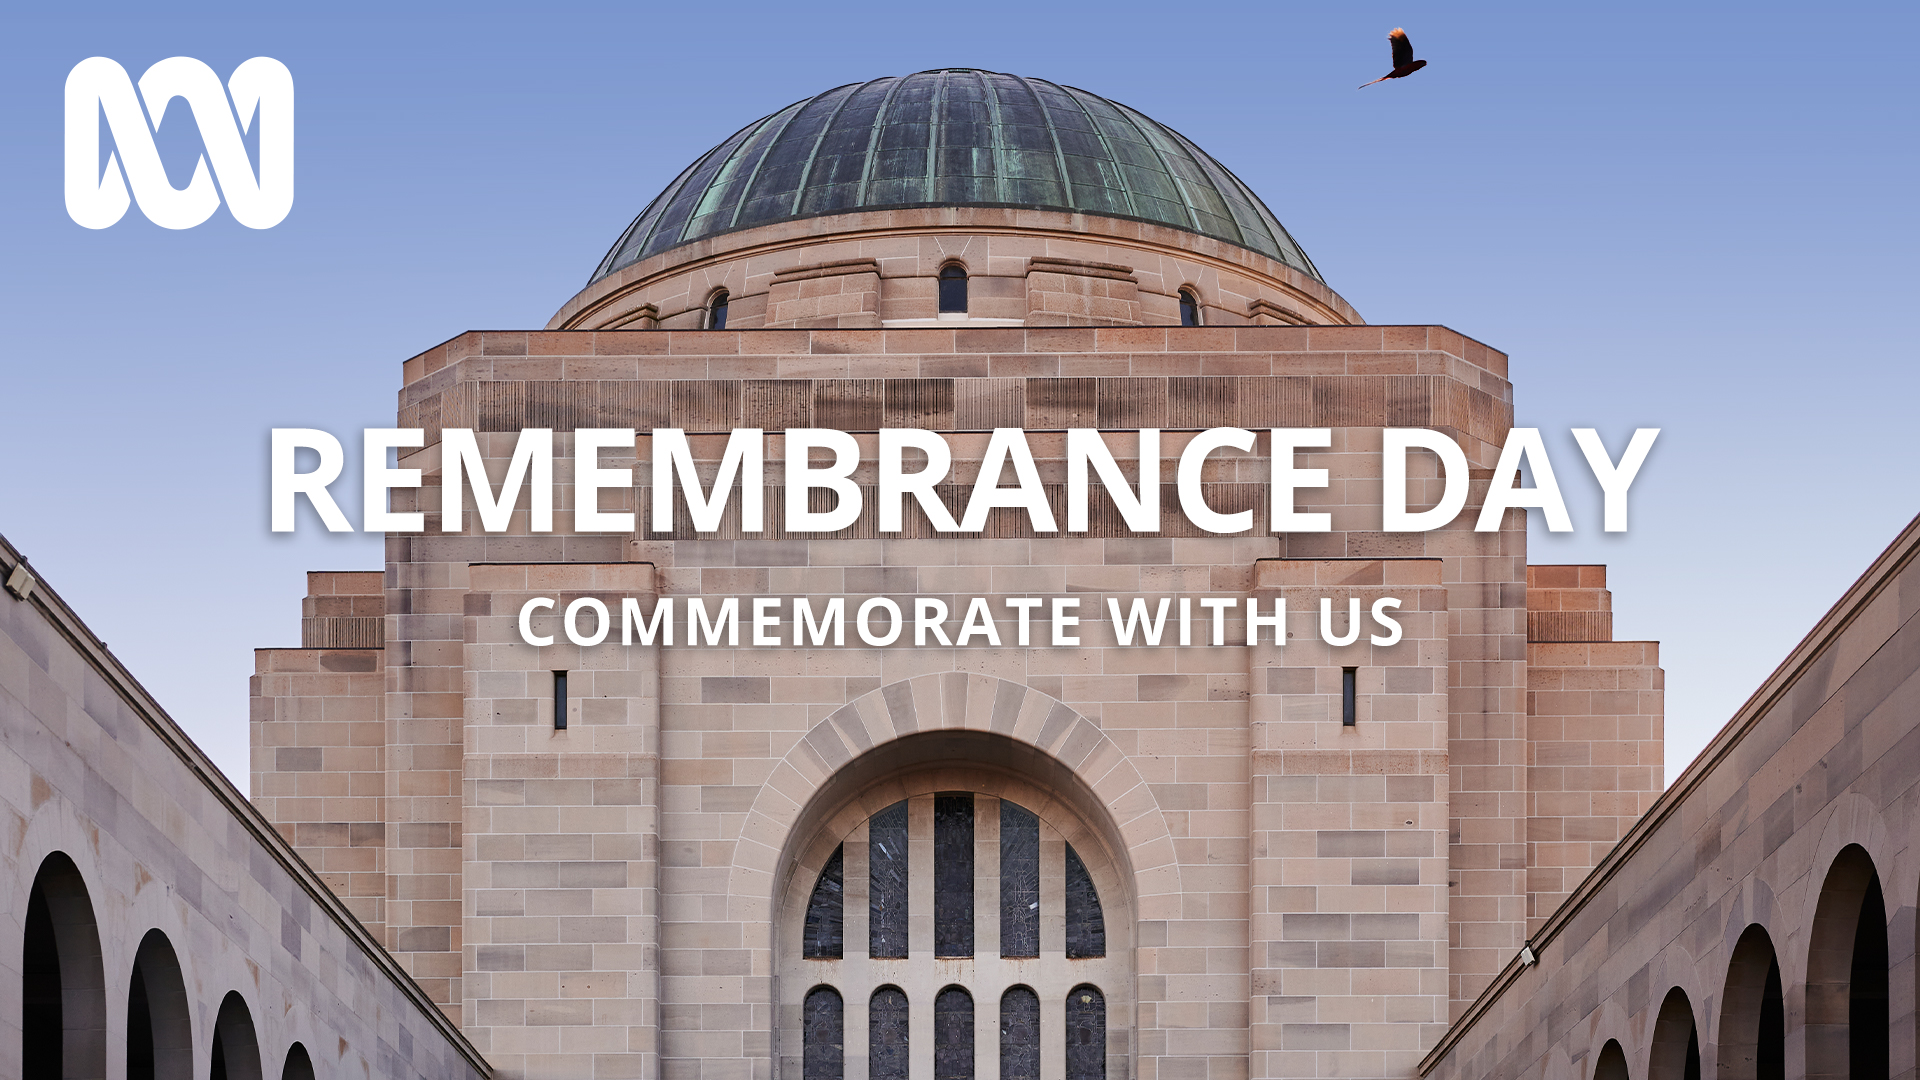 Commemorate with the ABC - Remembrance Day & RSL Queensland